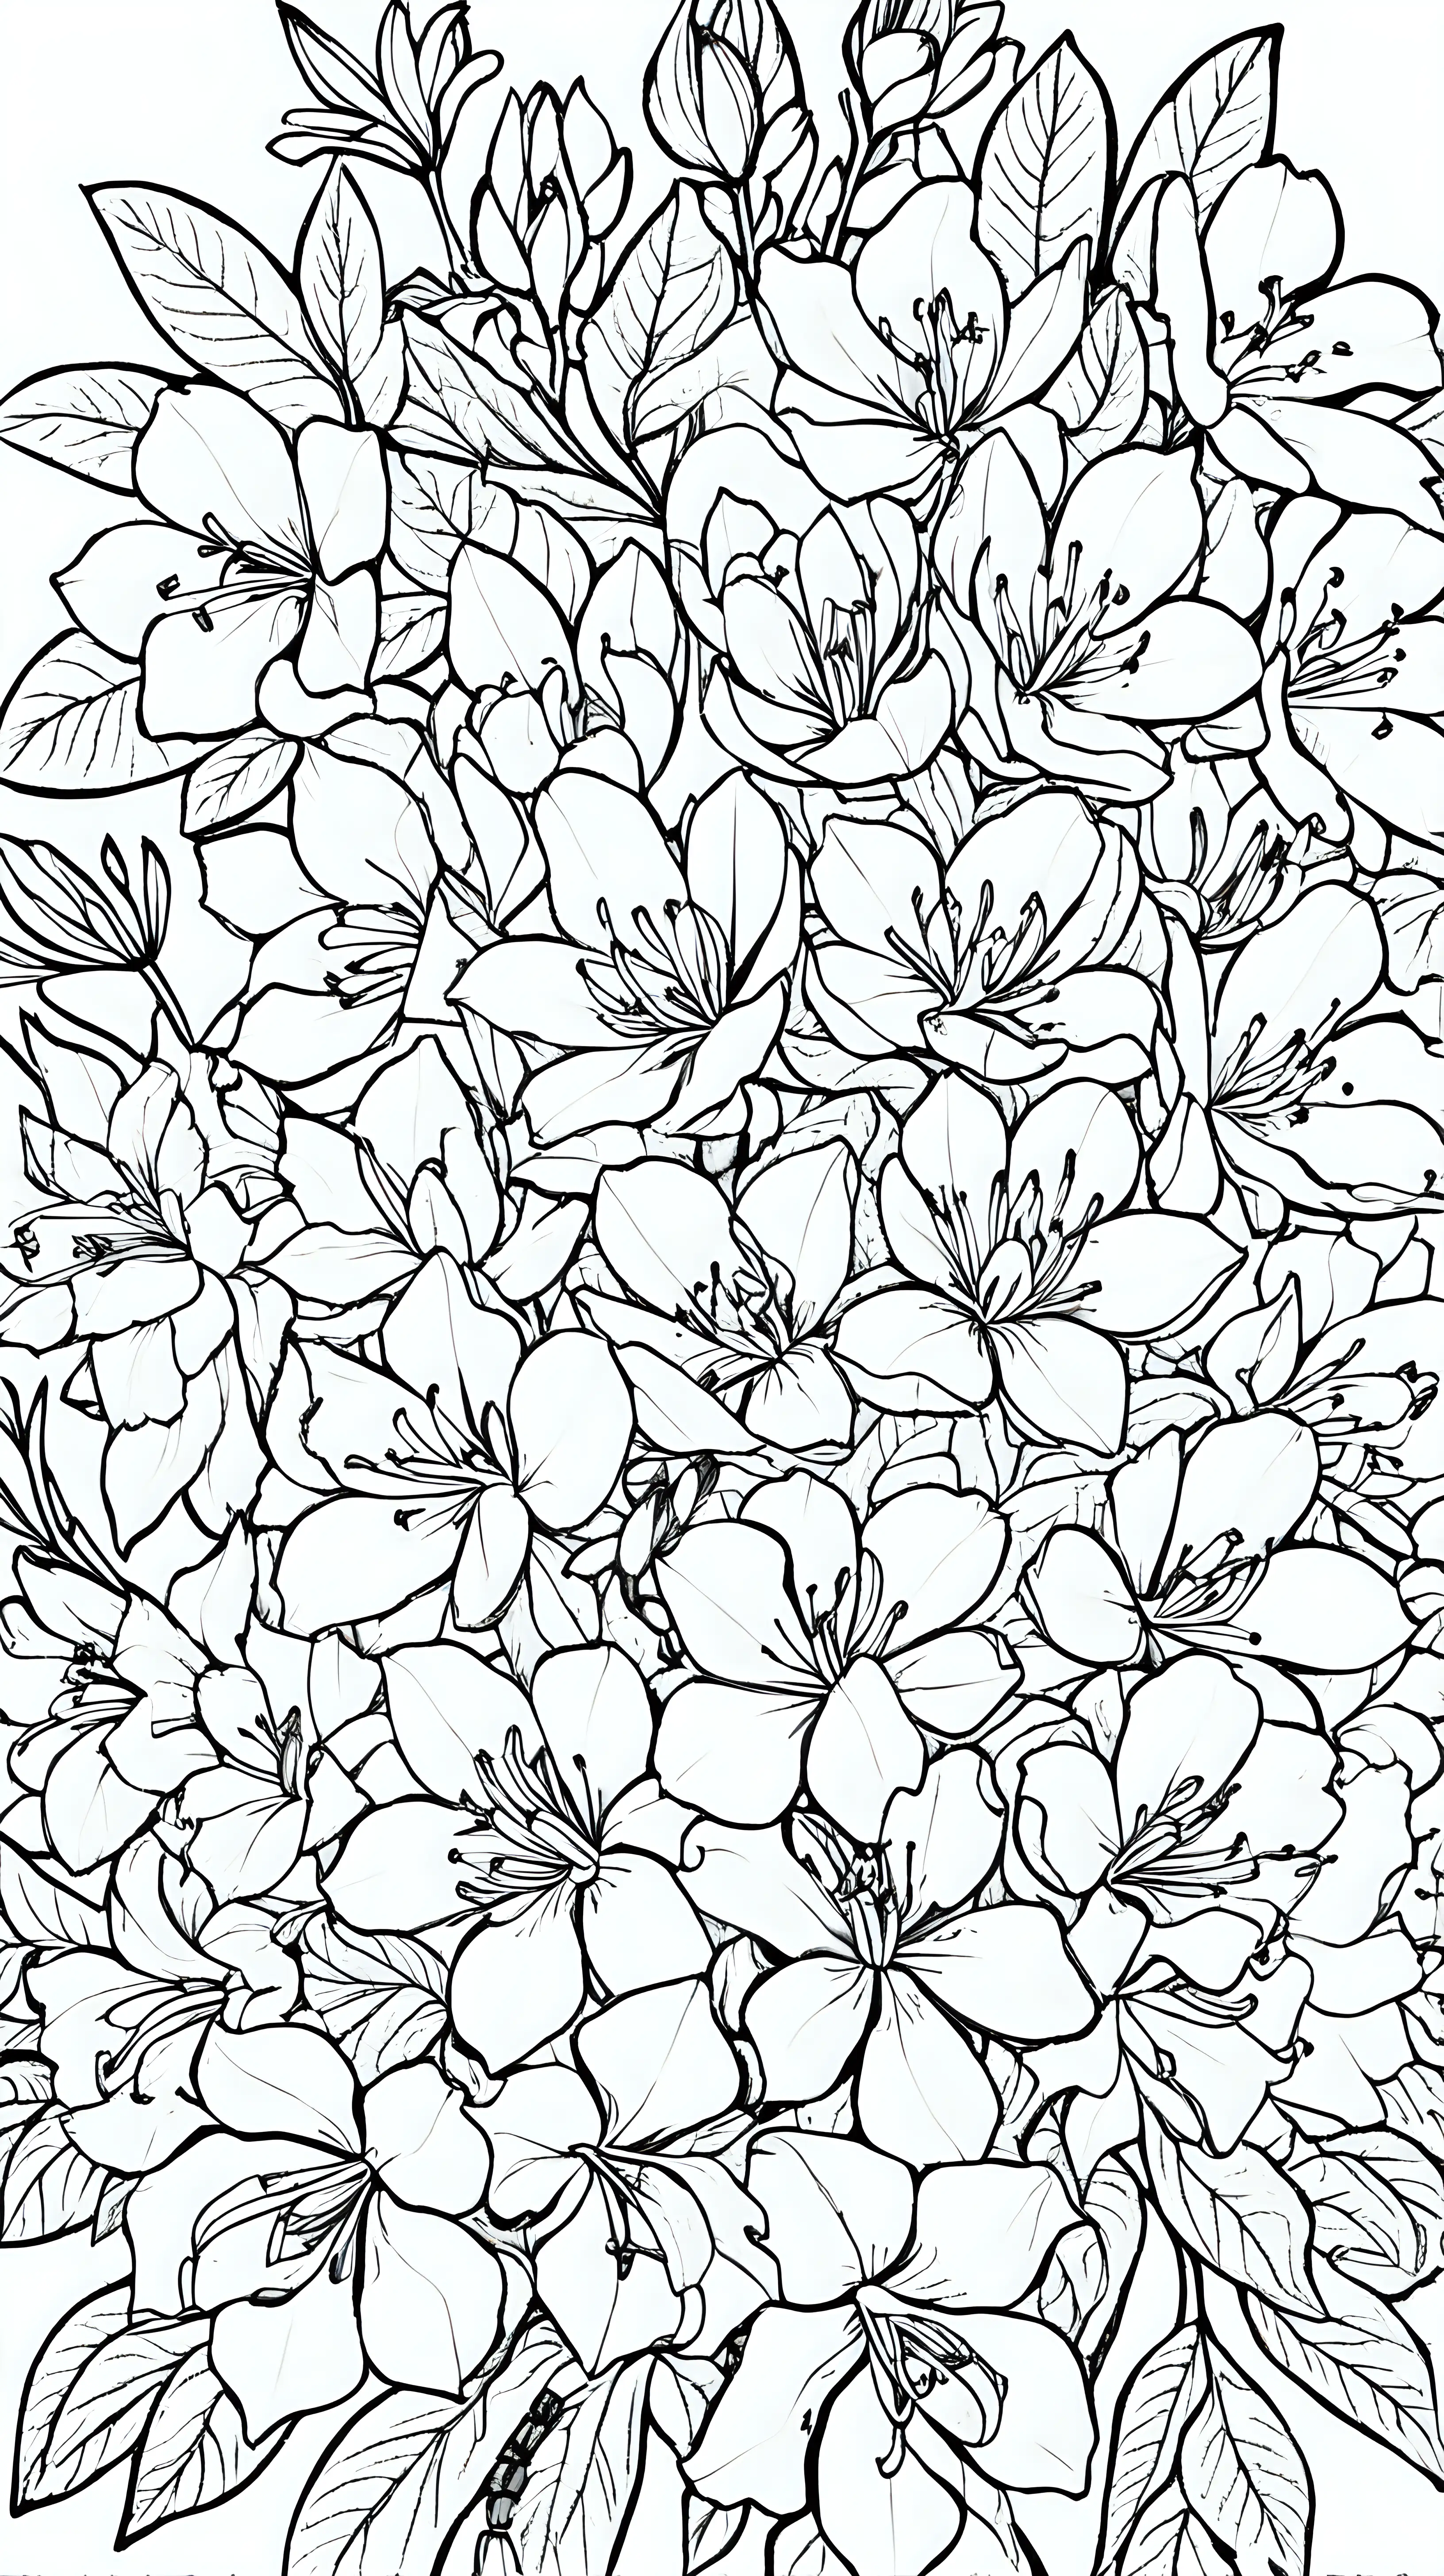 Floral Mandala Coloring Page with Azalea Blossoms